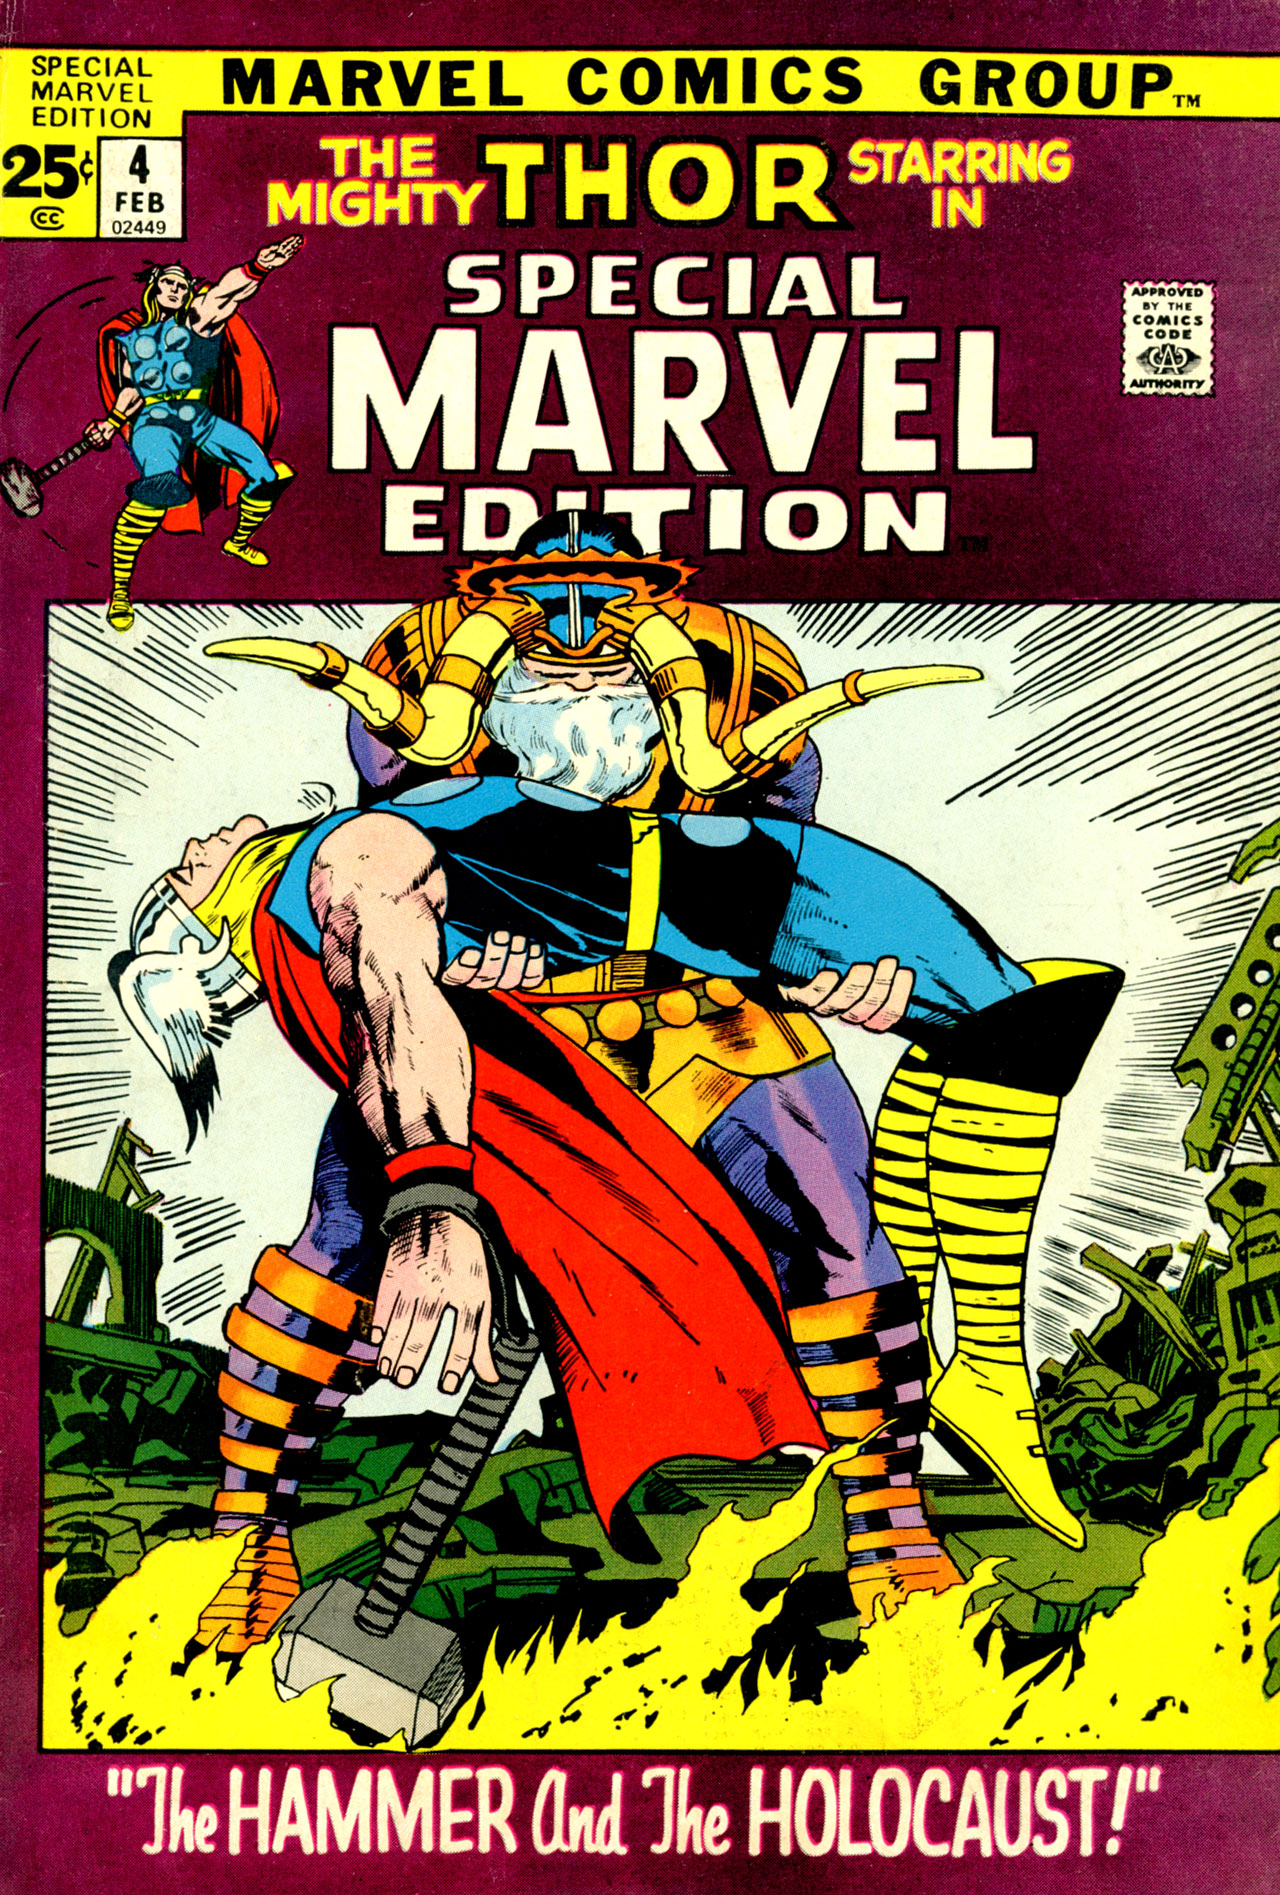 Read online Special Marvel Edition comic -  Issue #4 - 2